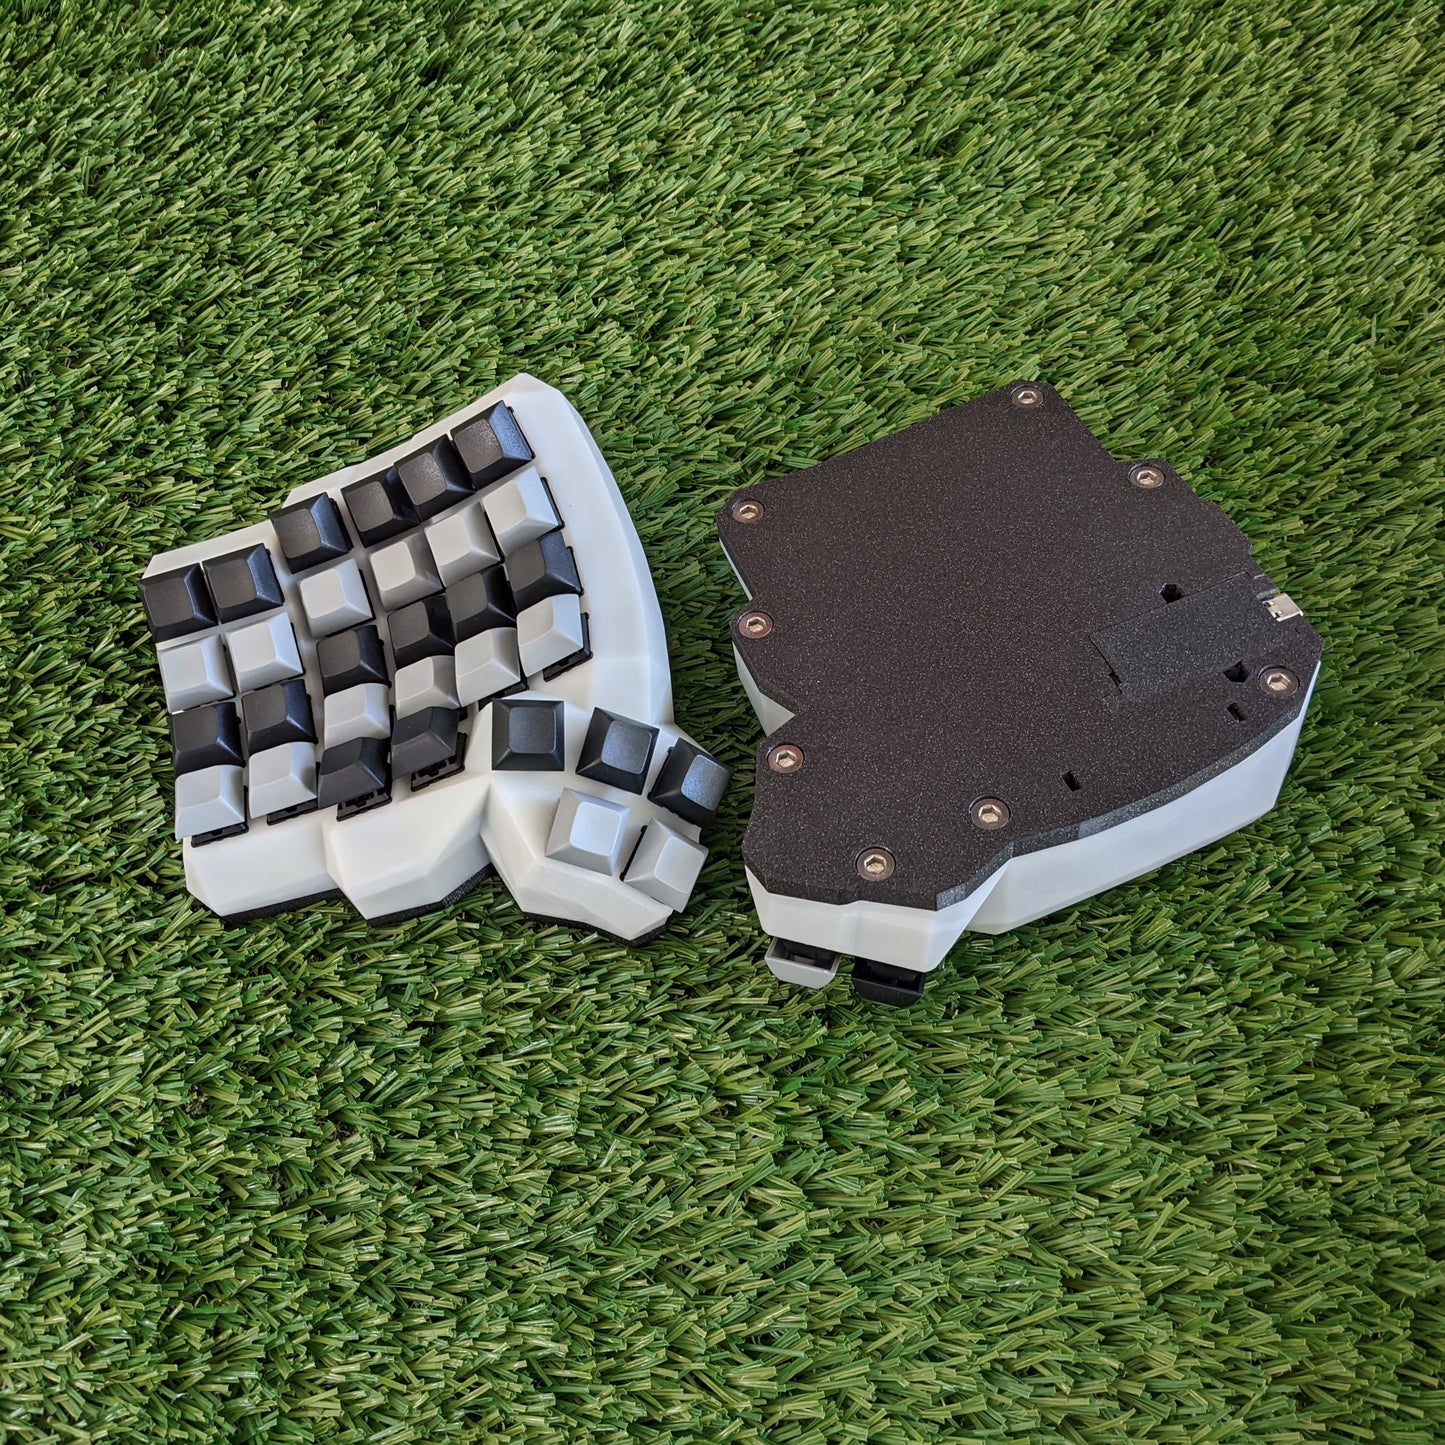 taikohub ergonomic dactyl manuform keyboard in white resin in size medium fully built top and bottom view